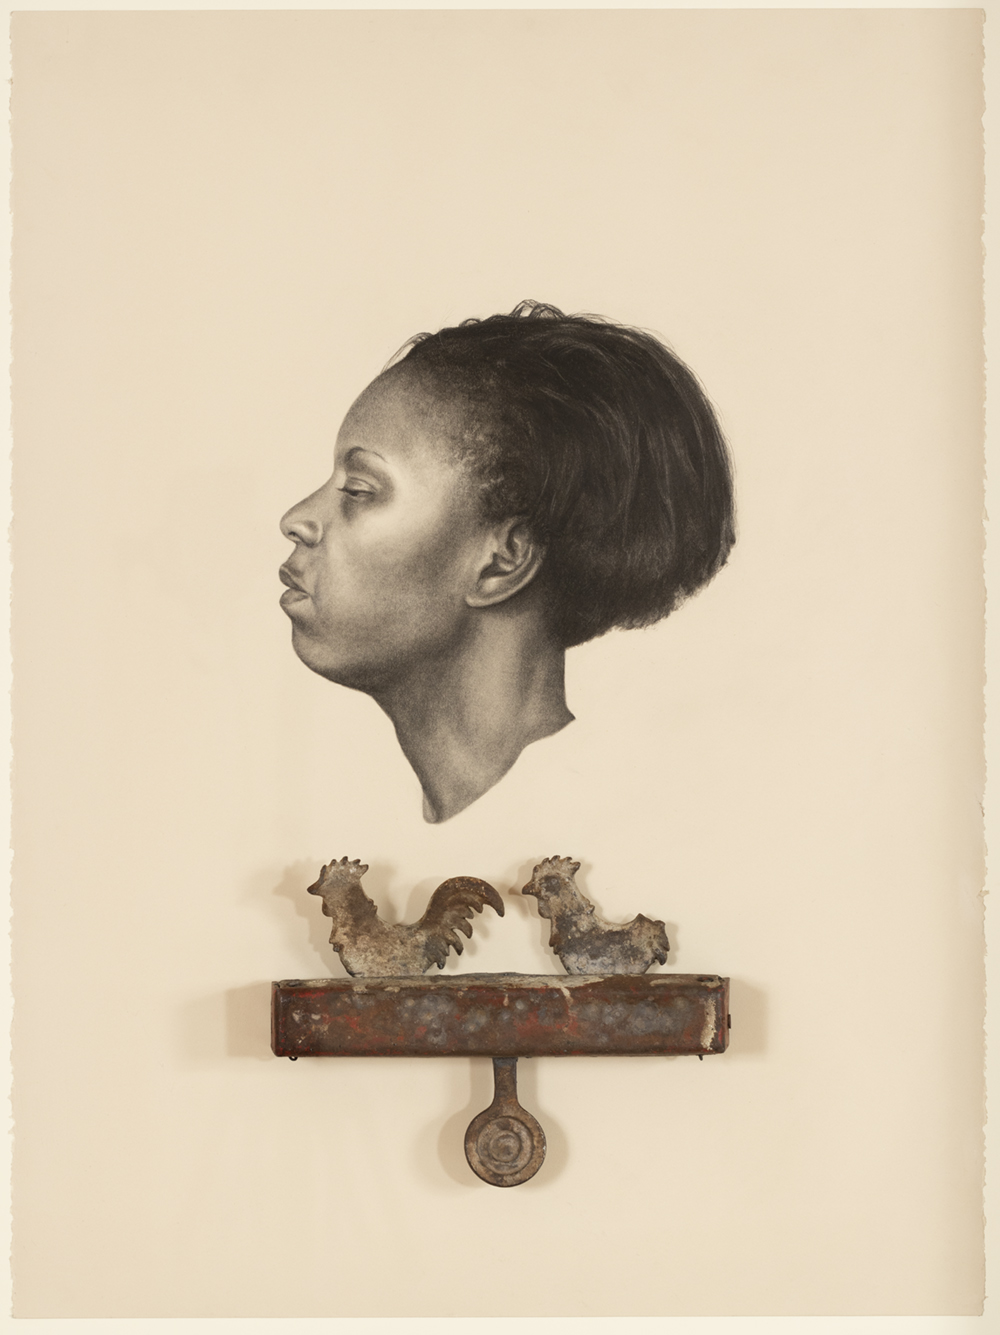 Drawing of a Black woman’s face in profile wearing a stoic expression. The face hovers above a rusted and worn shooting gallery target with two crows on top of the target’s bar